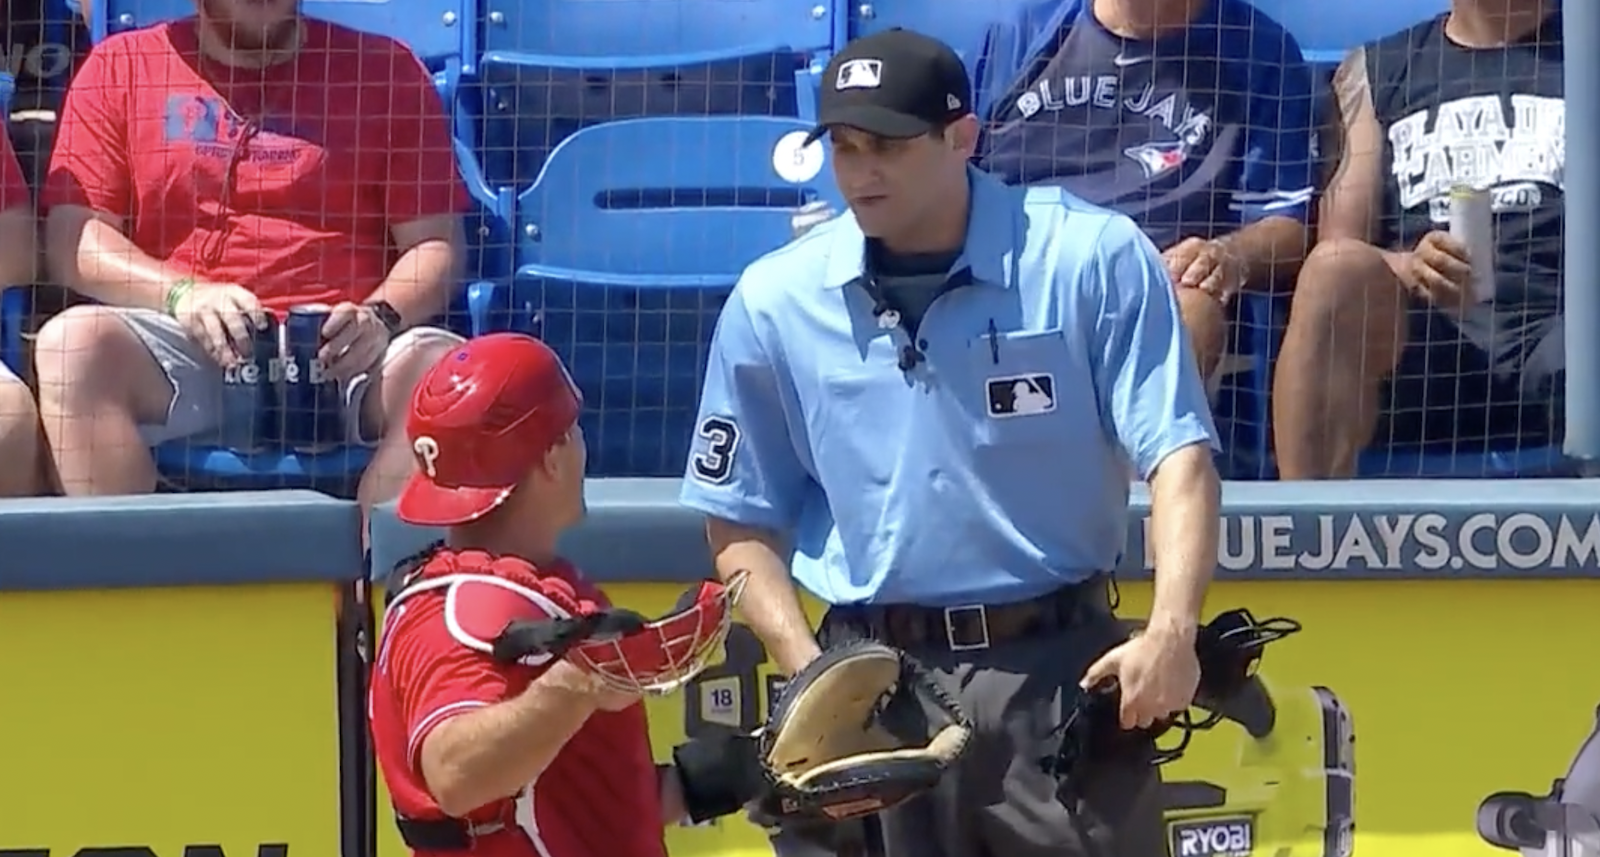 An umpire ejects JT Realmuto for no reason